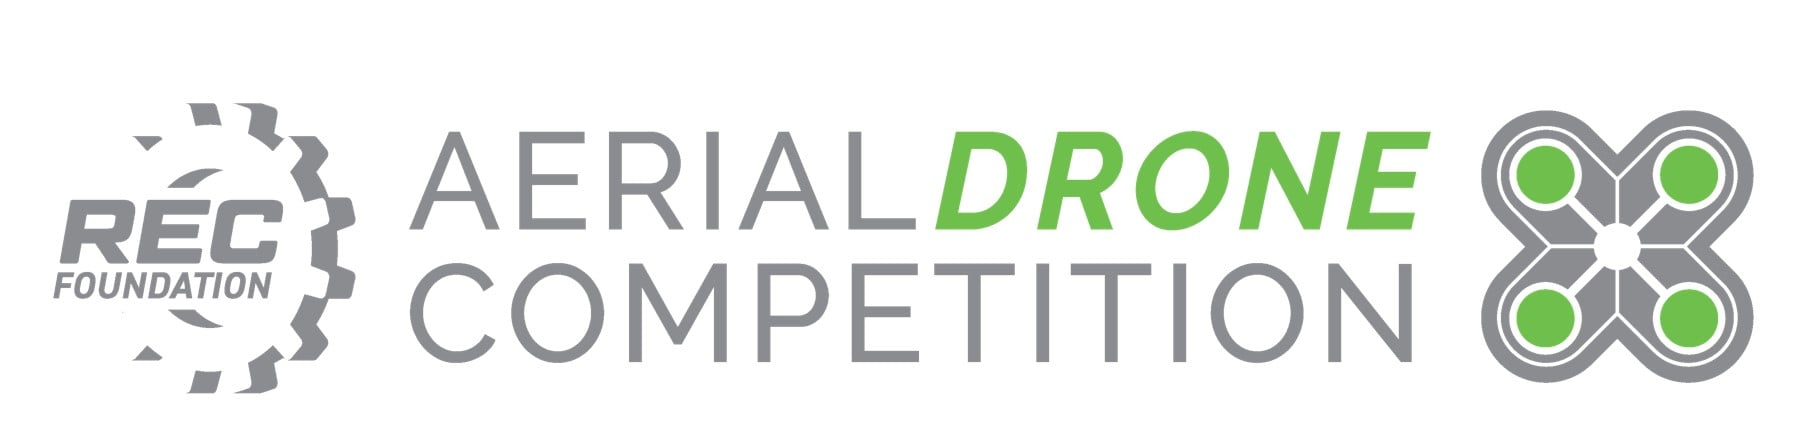 Aerial Drone Competition: Intro to the CoDrone EDU - Wednesday October 19th - 6:15pm Central Time - hosted by REC Foundation